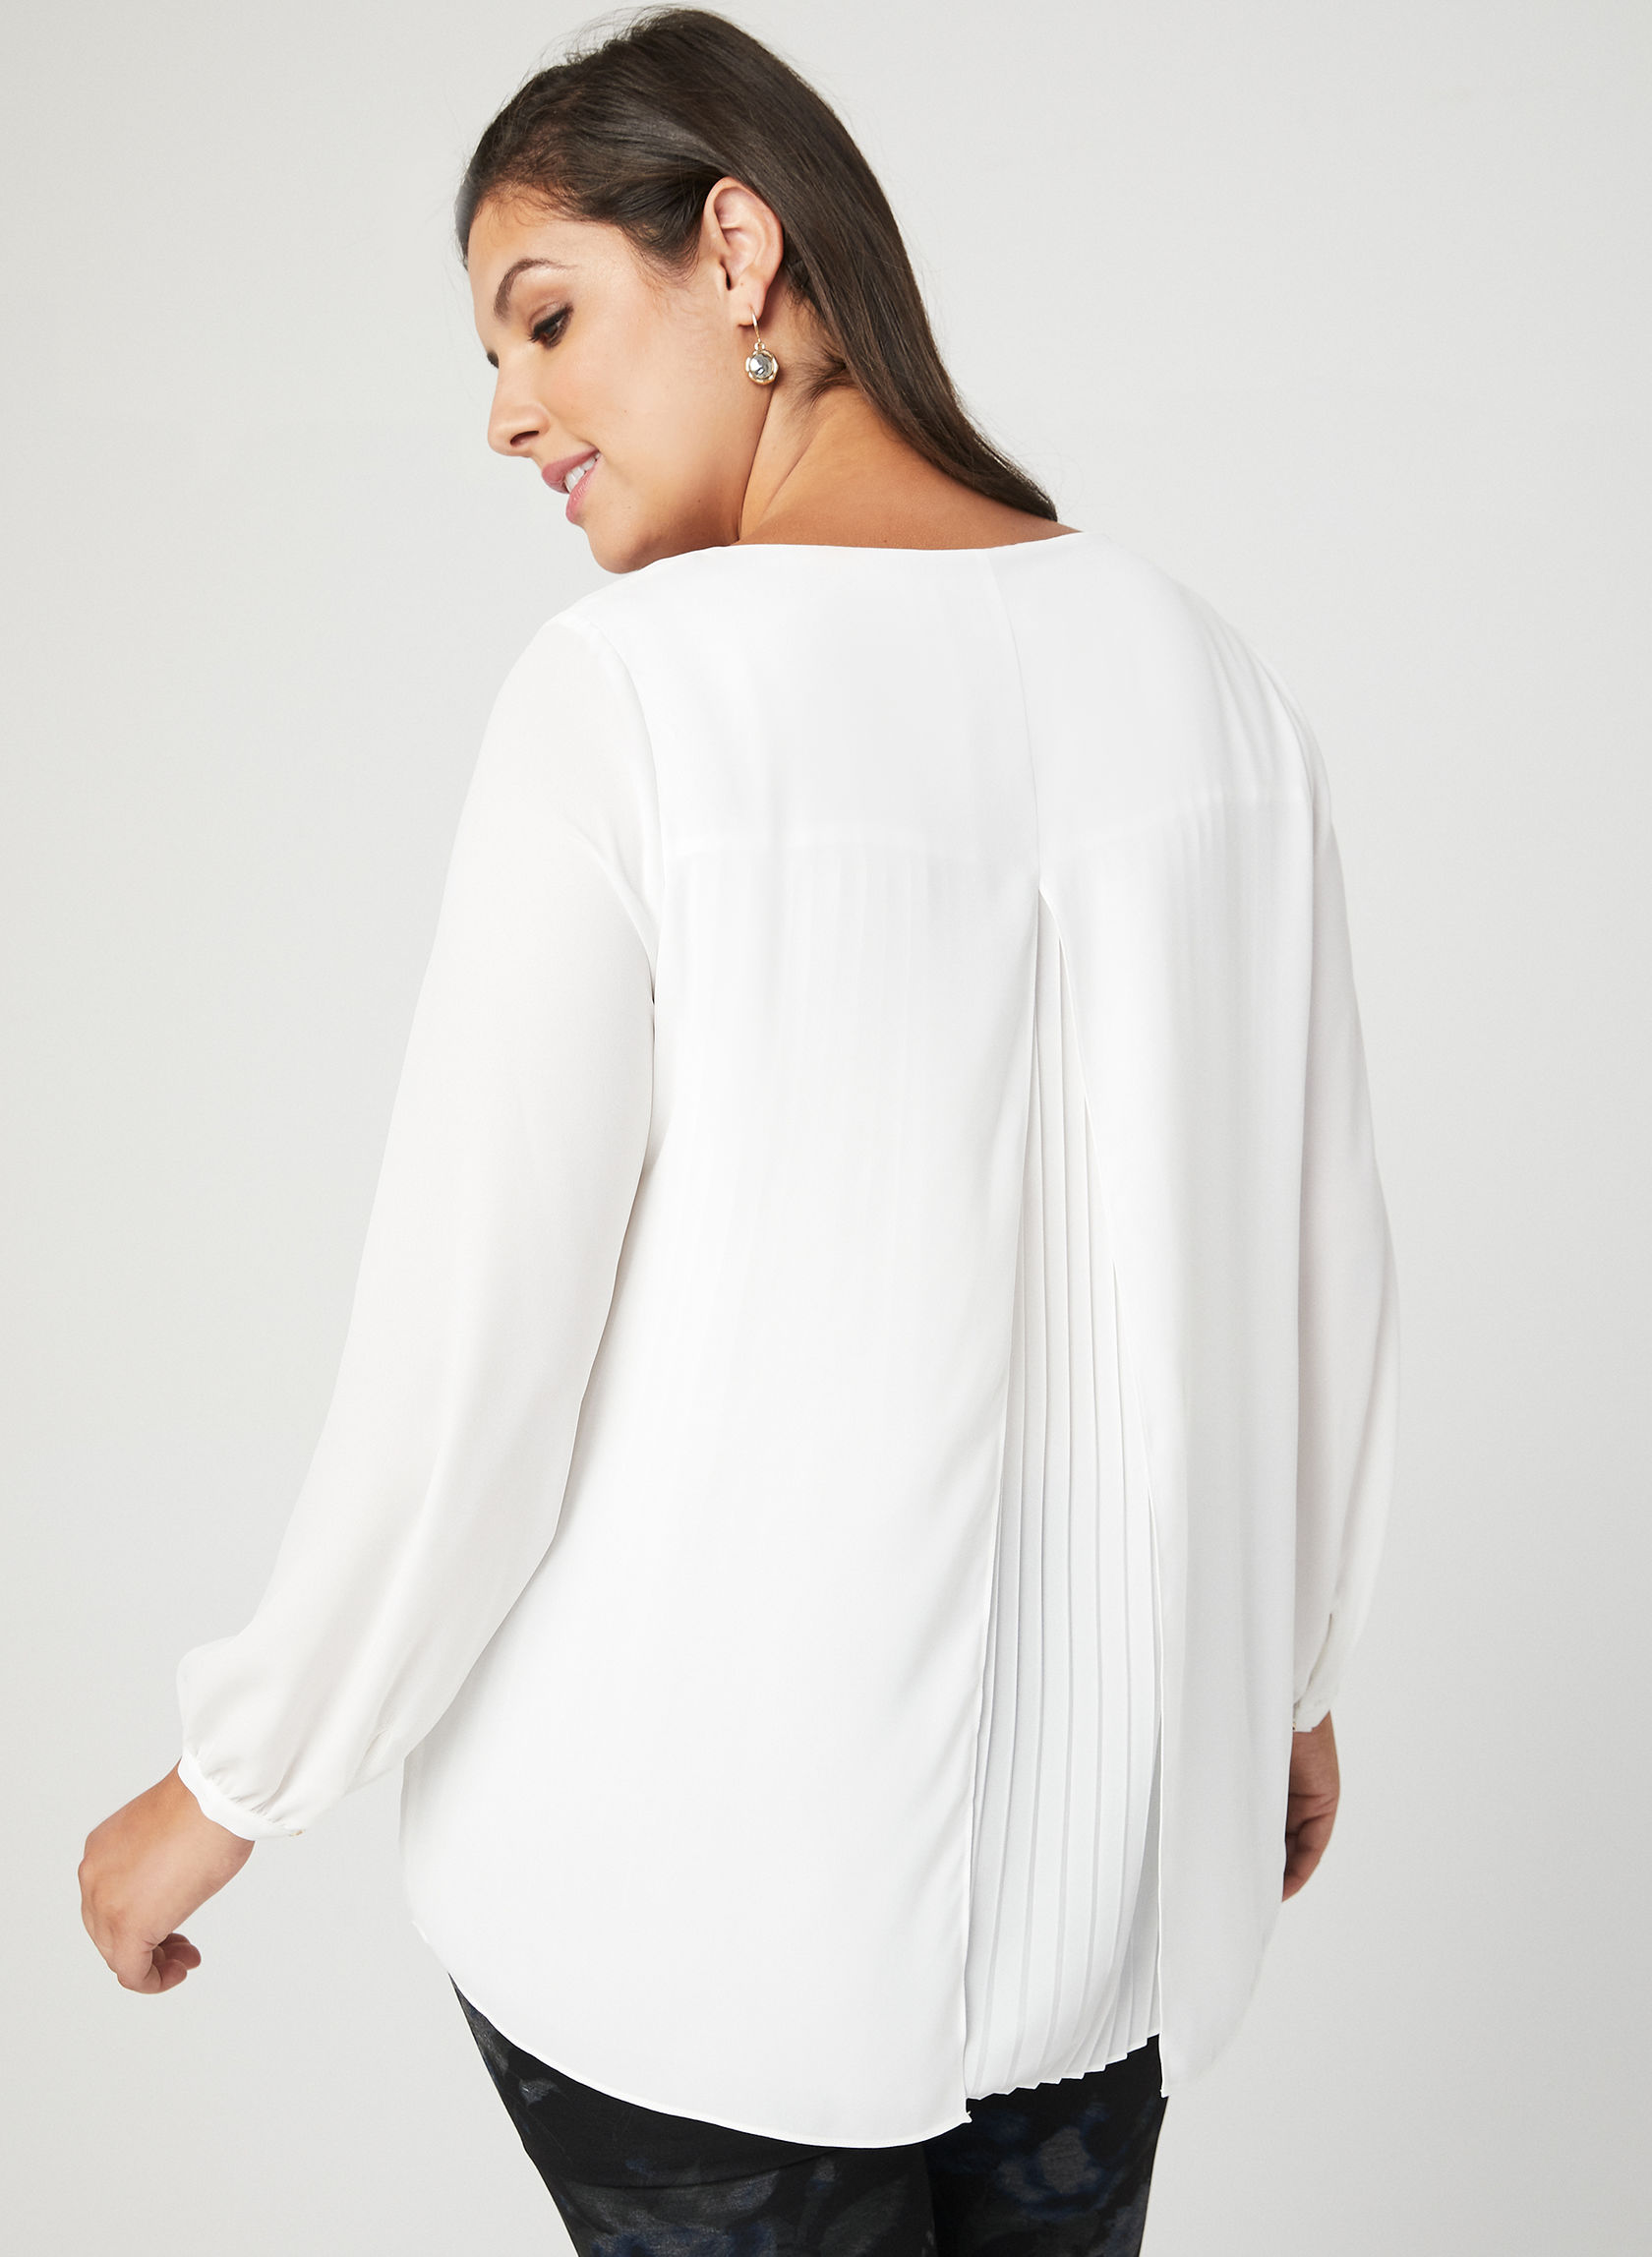 Back Capelet Overlay Blouse